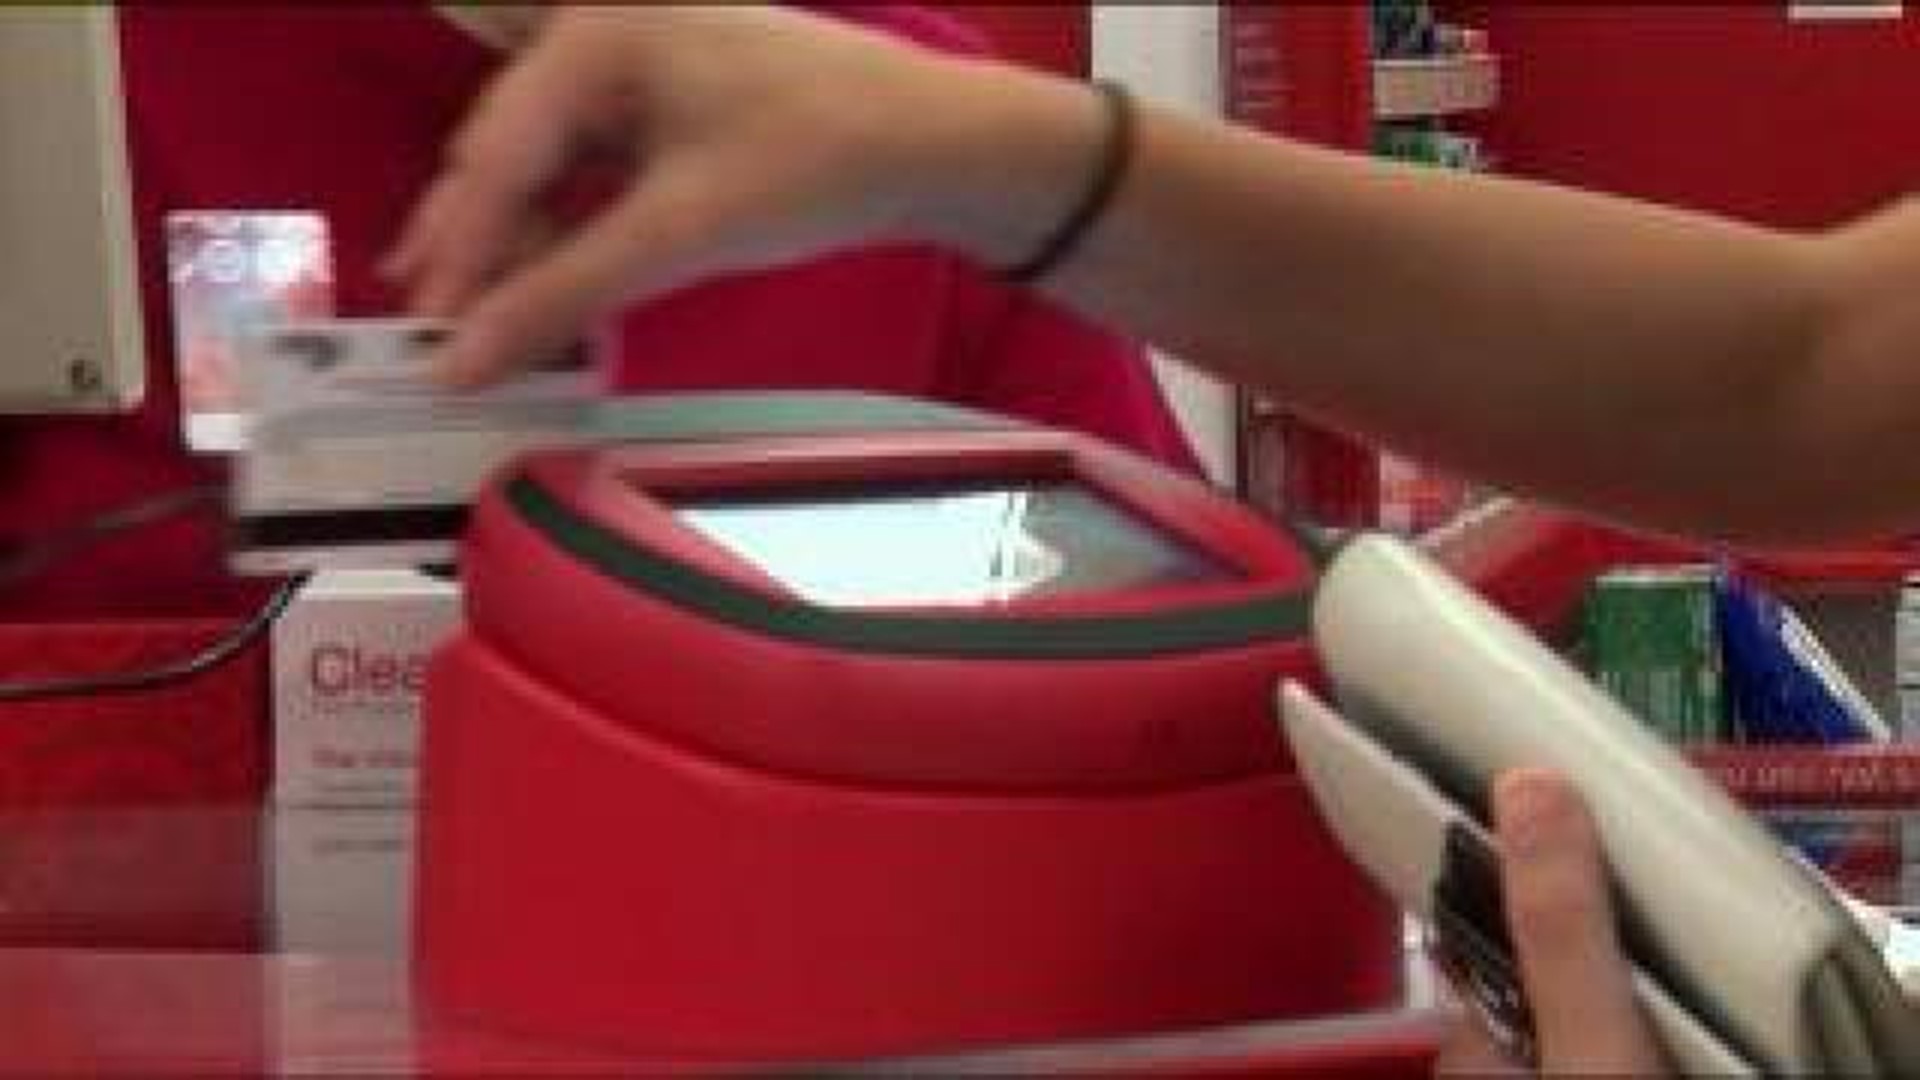 Target Reveals New Program For Customers After Data Breach